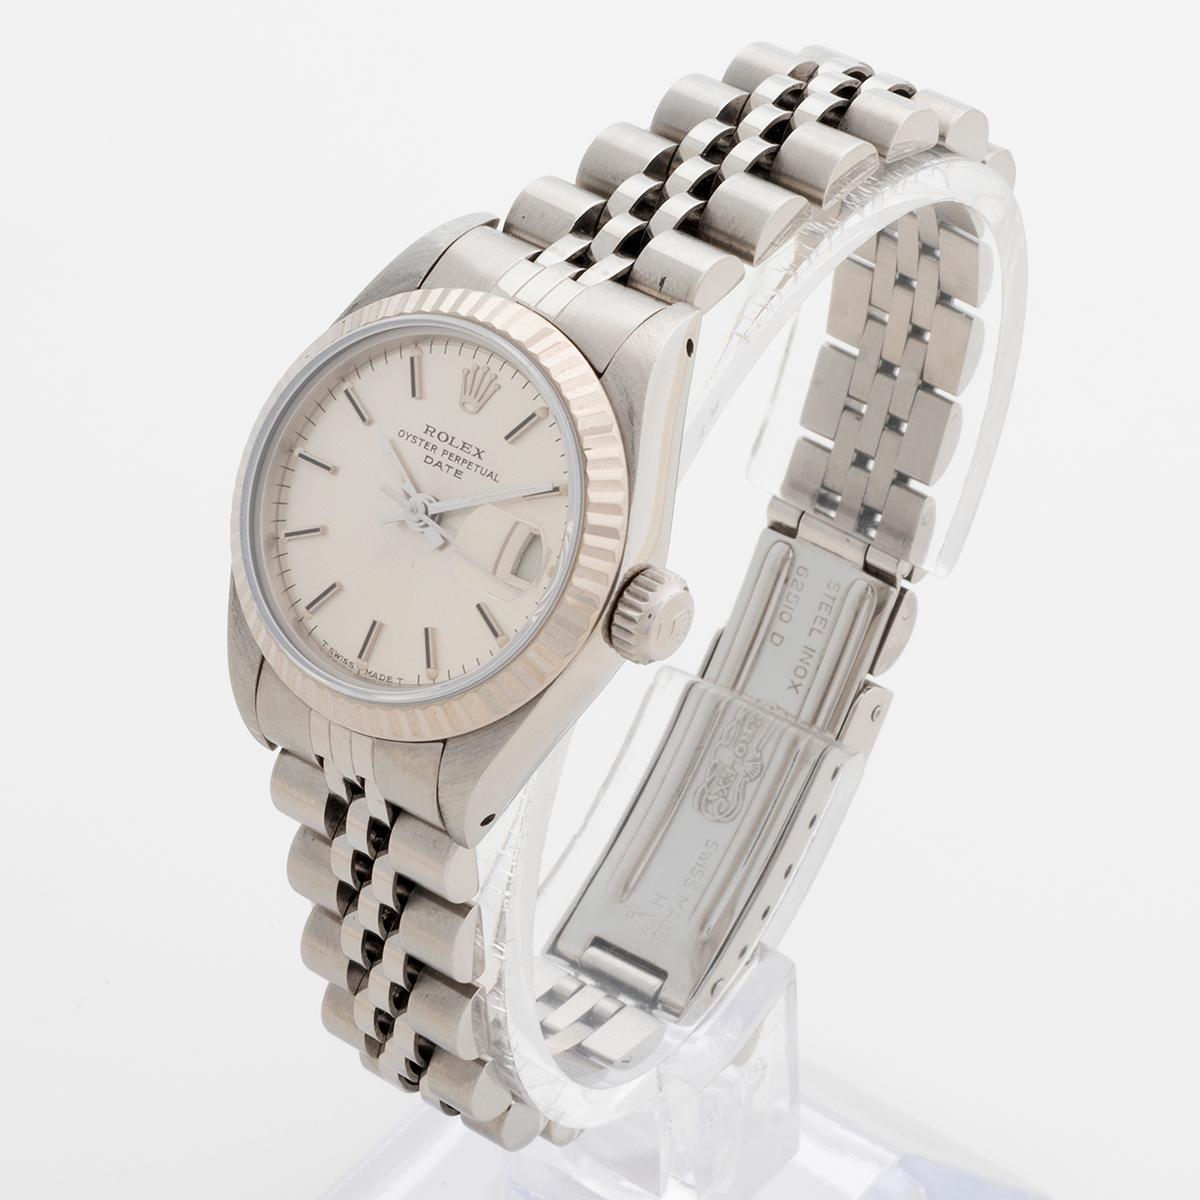 Women's or Men's Classic & Vintage Rolex Lady Datejust Ref 69174, Jubilee Strap, Box & Papers